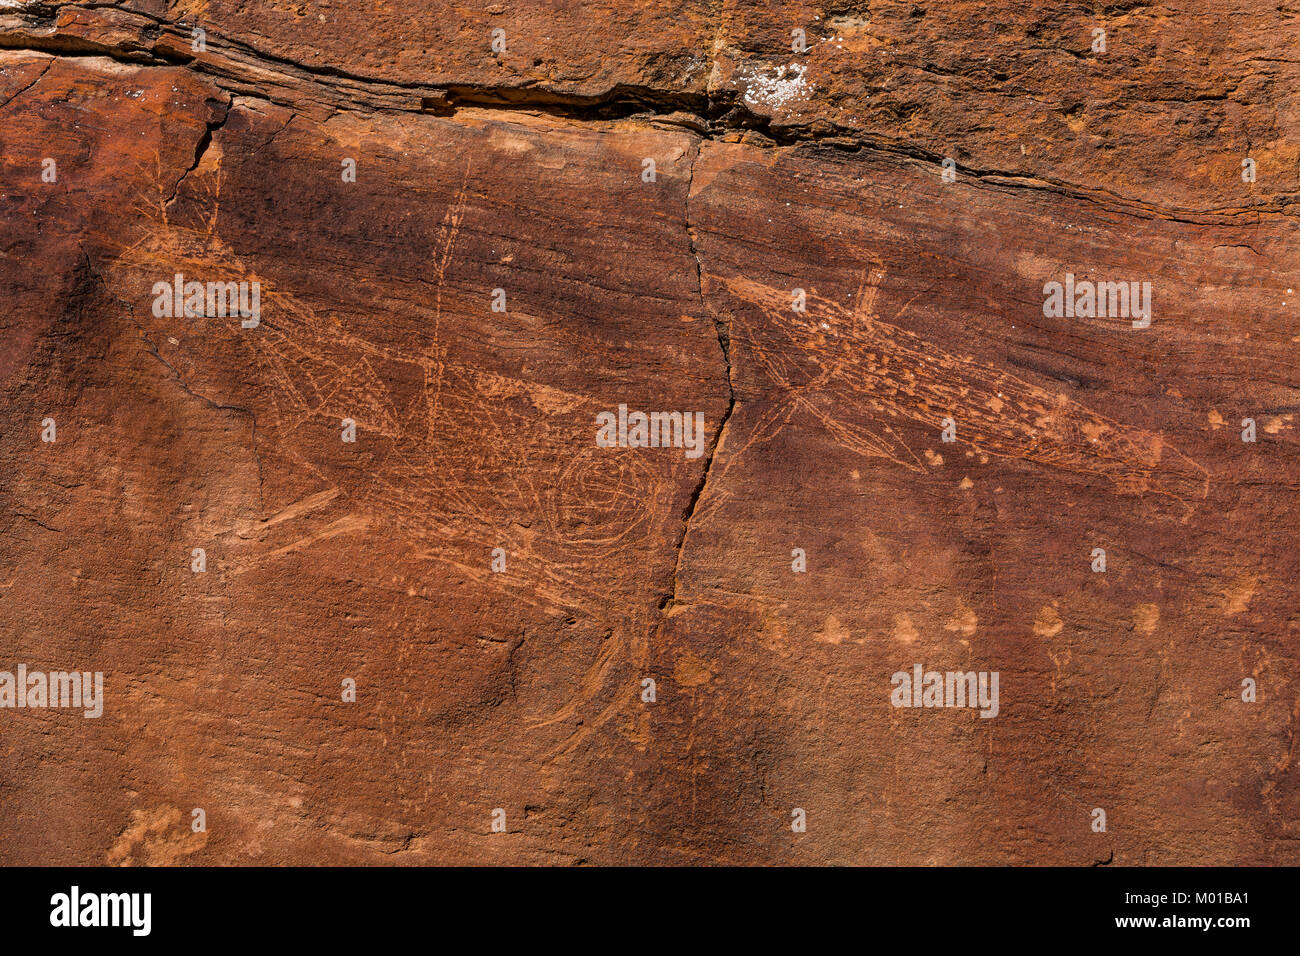 Petroglyphs with fine interior lines depicting game animals in Nine Mile Canyon, Utah, USA Stock Photo